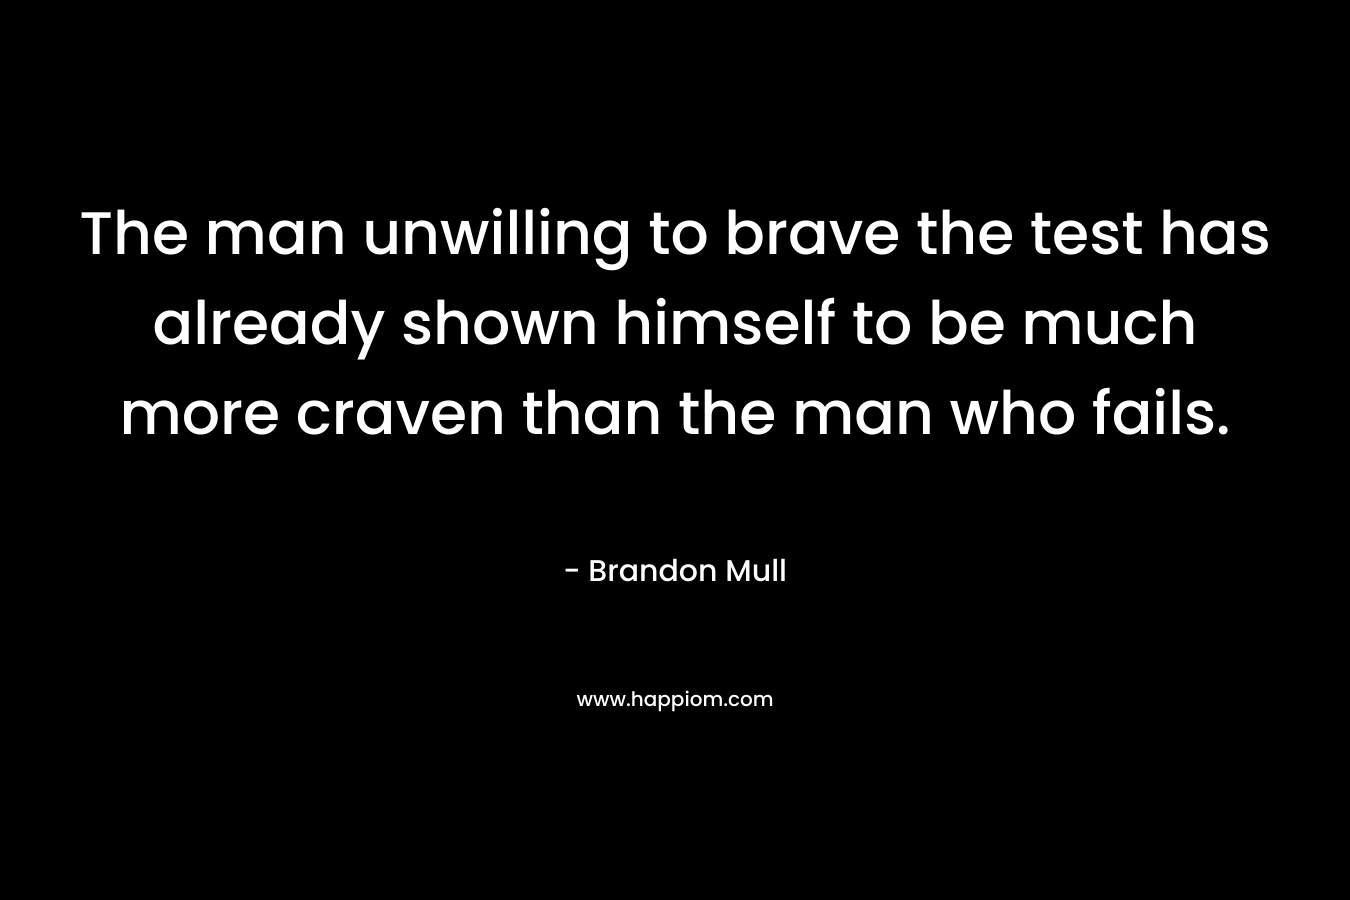 The man unwilling to brave the test has already shown himself to be much more craven than the man who fails. – Brandon Mull